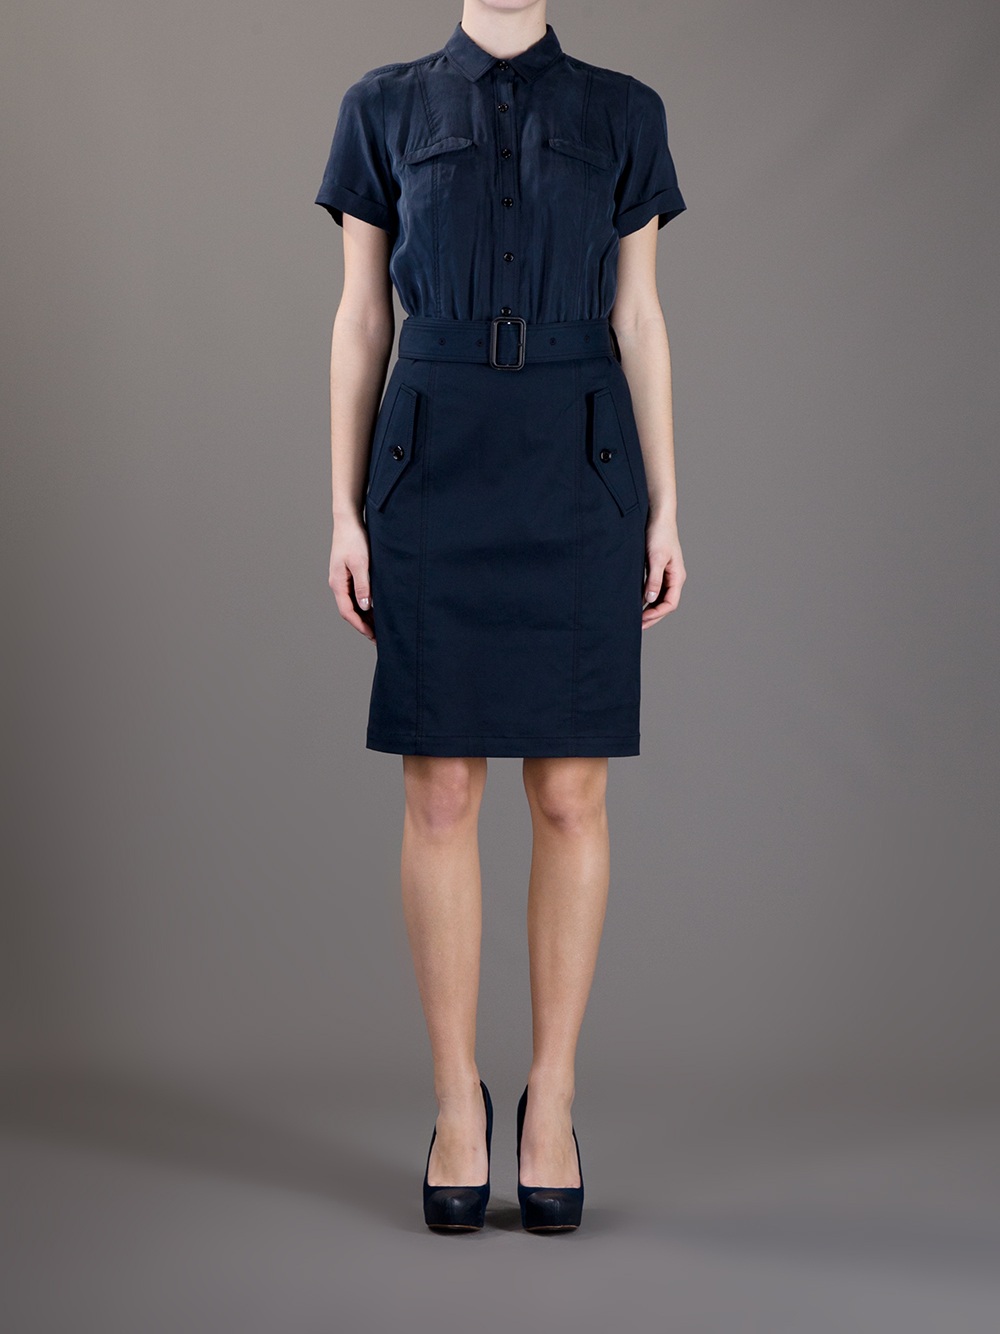 Burberry Brit Belted Shirt Dress in Blue | Lyst